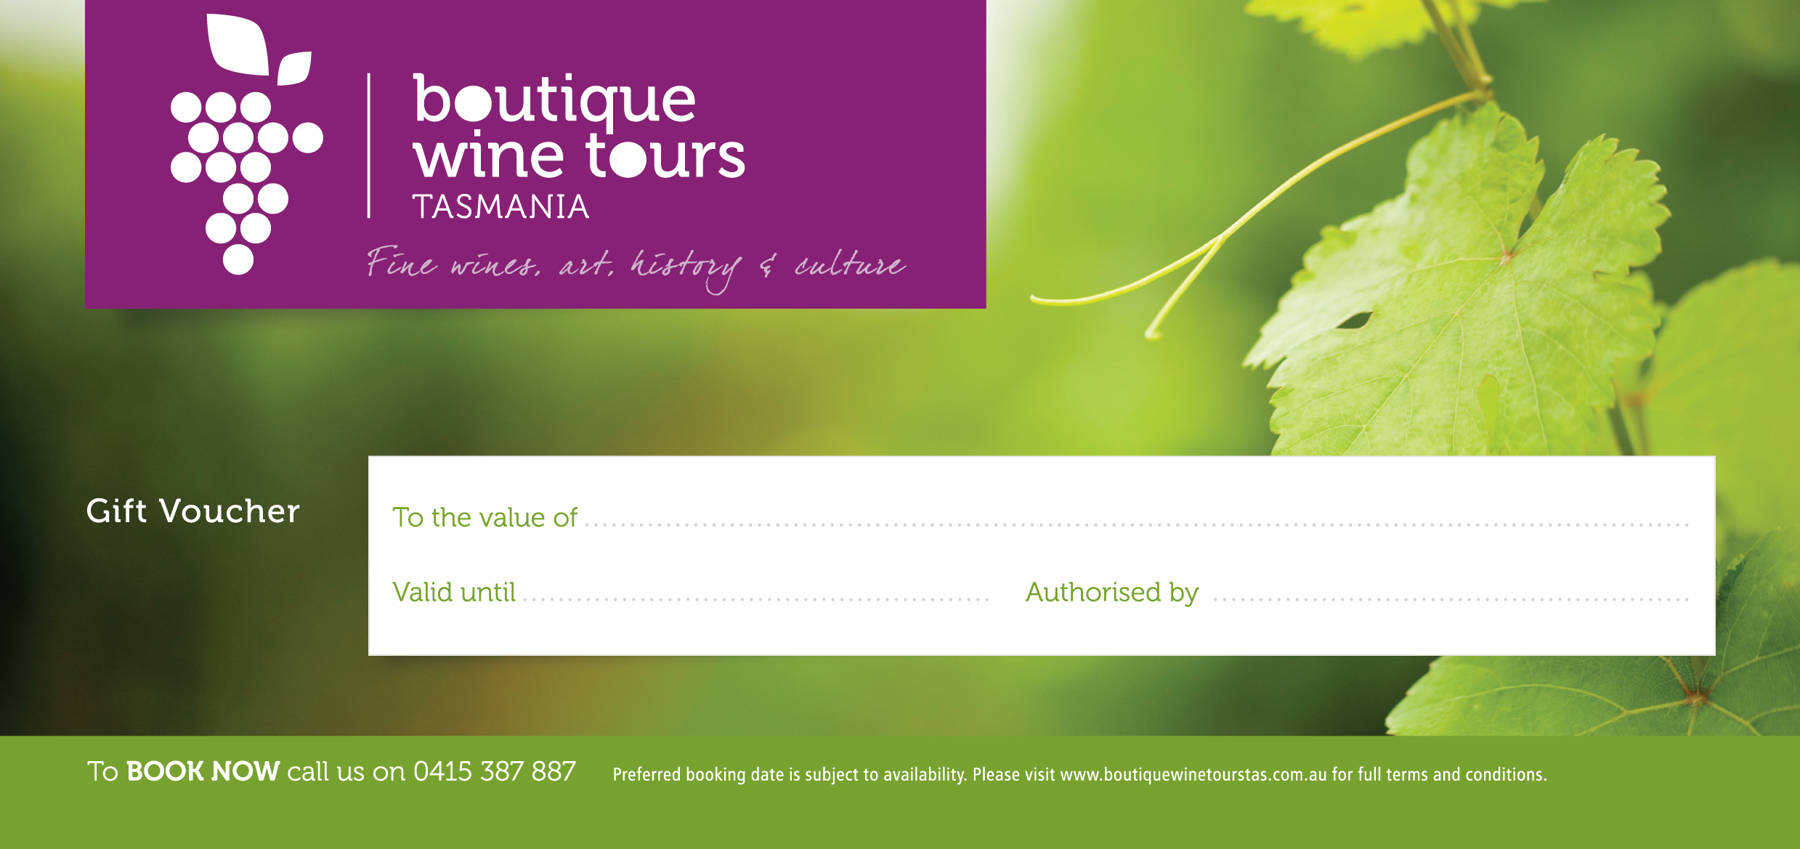 Boutique Wine Tours Tasmania gift certificate – sample only